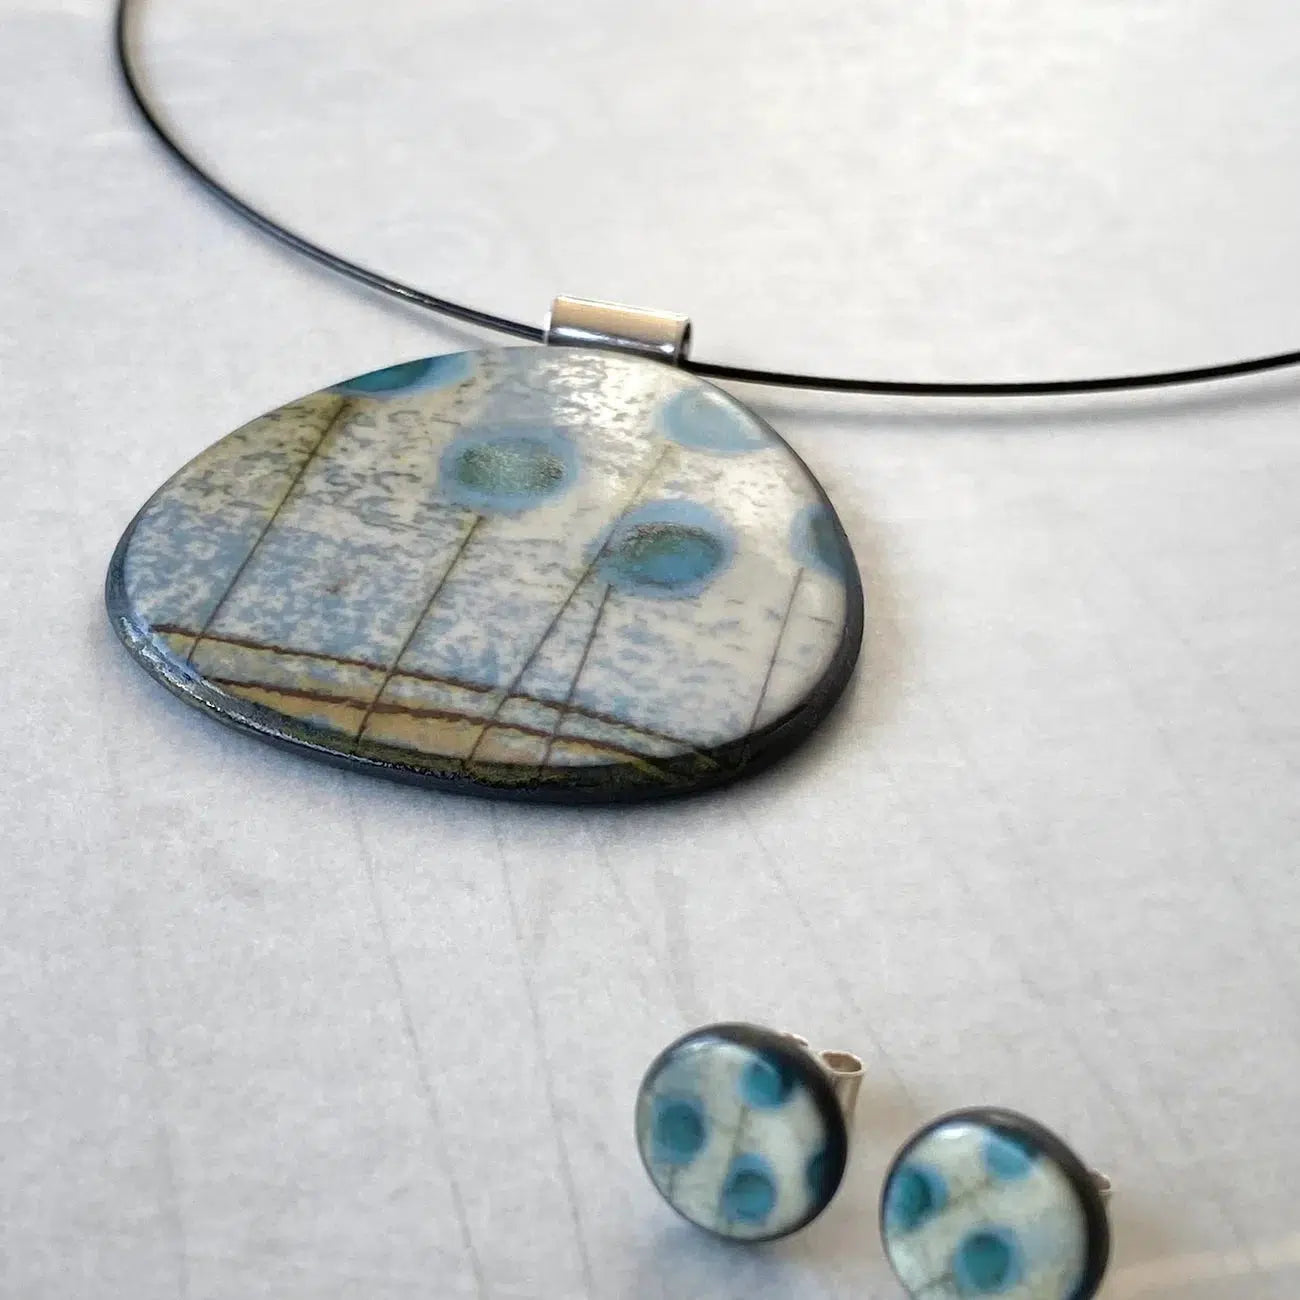 P-SHR Seed-heads Rounded Pendant by Karen Howarth at Padstow Gallery, Cornwall